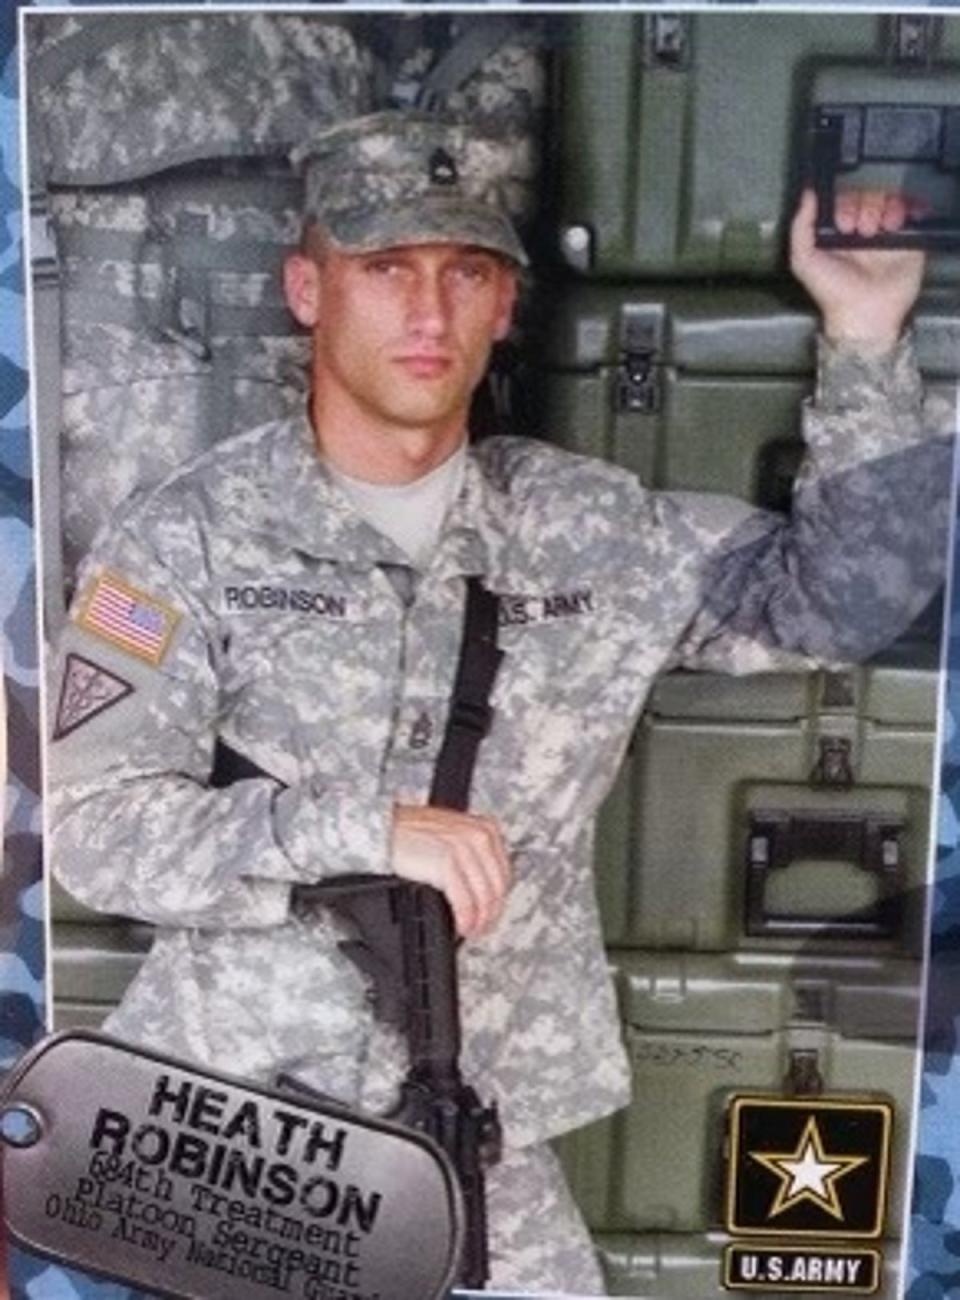 Heath Robinson died at the age of 39 from a rare cancer caused by toxic exposure to burn pits on deployment (Danielle Robinson)